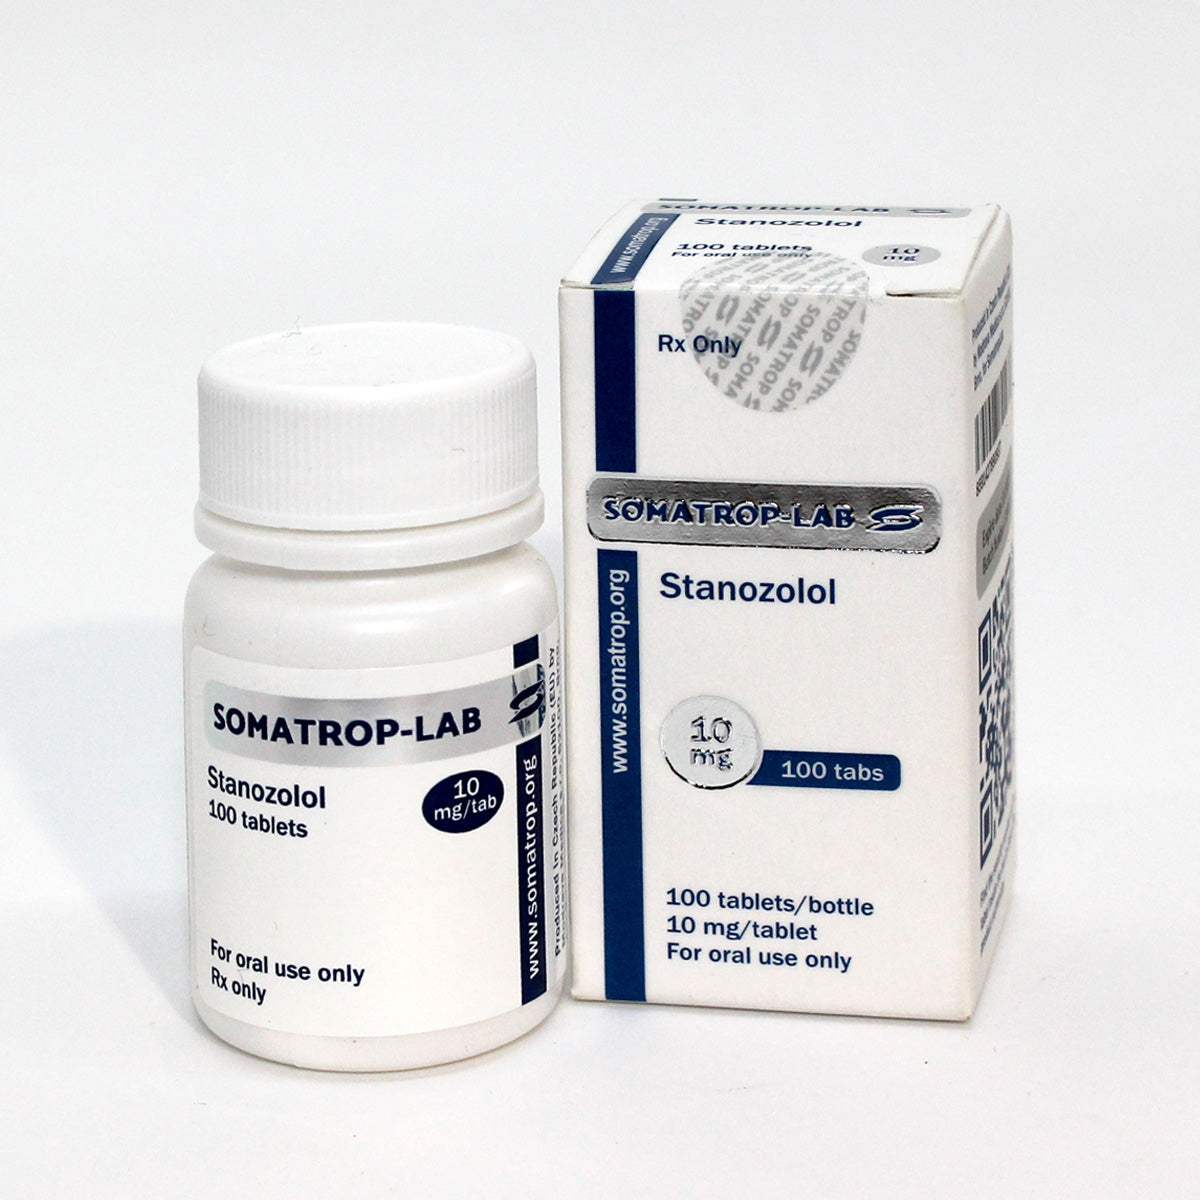 Somatrop-Lab Stanozolol 100 tablets, 10mg each, front packaging.